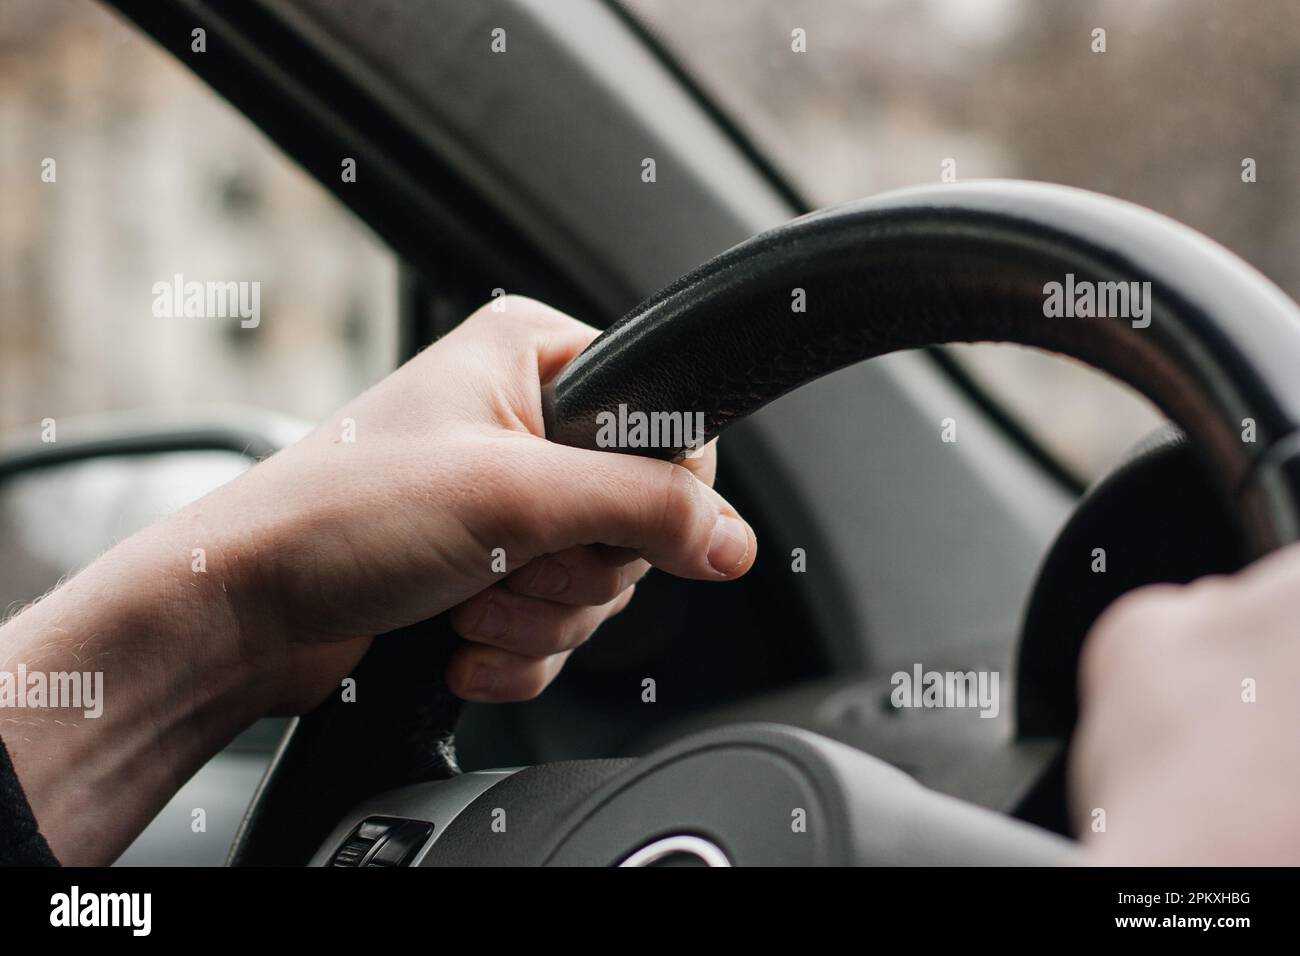 Drivers's hands on a stearing wheel of a car Stock Photo